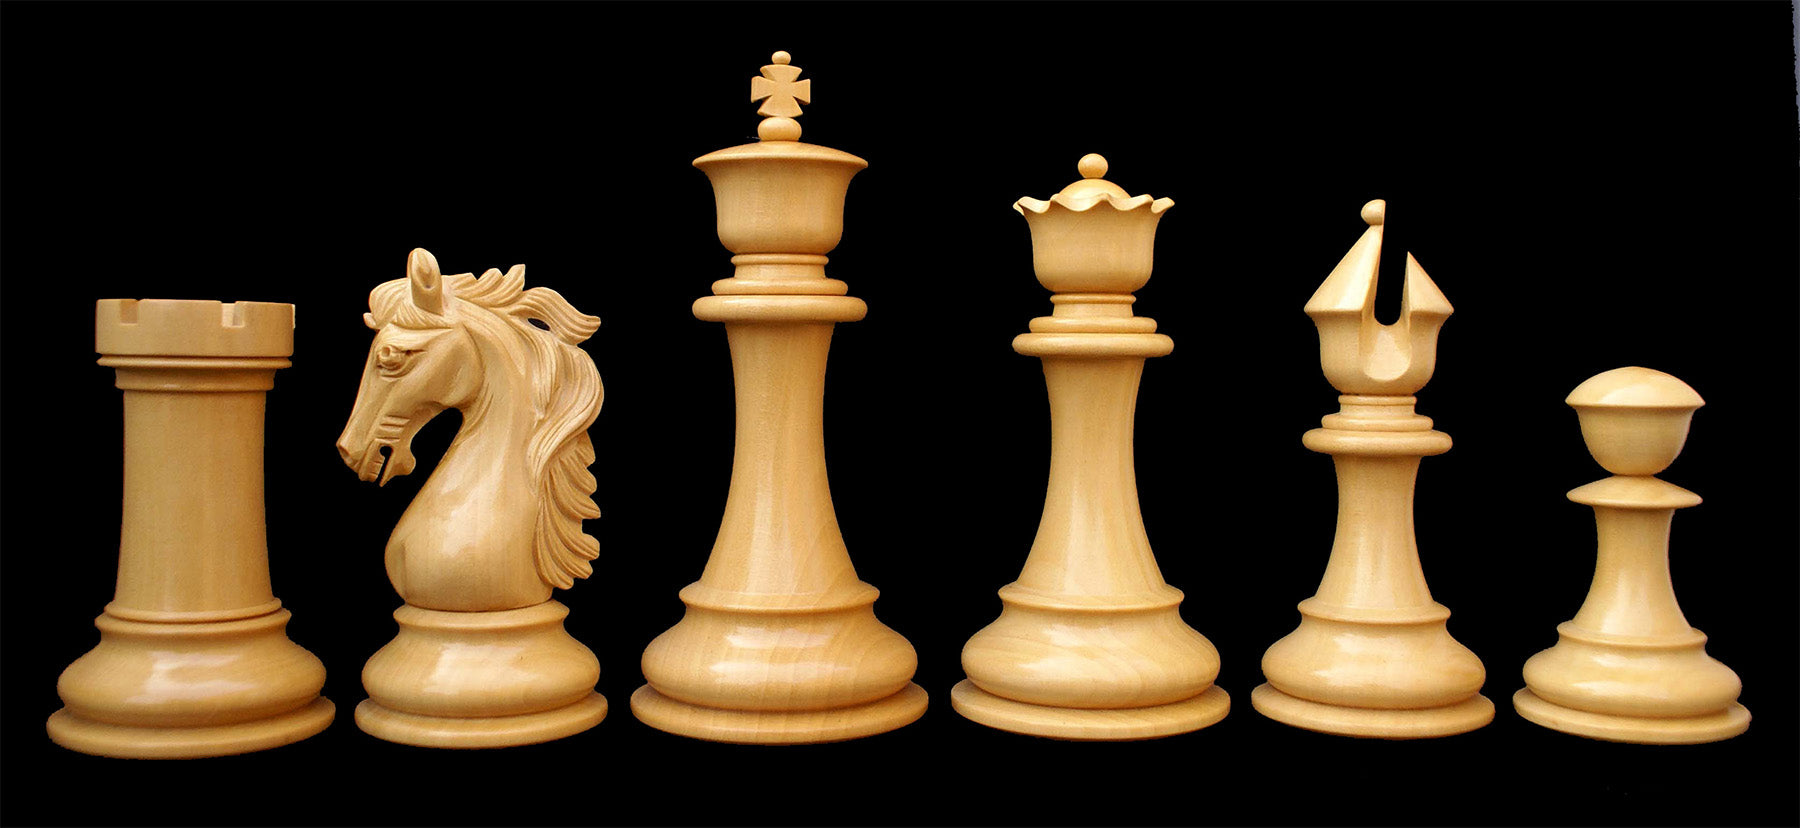 ChessBaron  Staunton Chess Sets, Heritage Chess, Chess Pieces, Boards,  Computers, Clocks, Backgammon. Pay by Card, Paypal or Crypto Currency  (Bitcoin, Etherium, etc.)